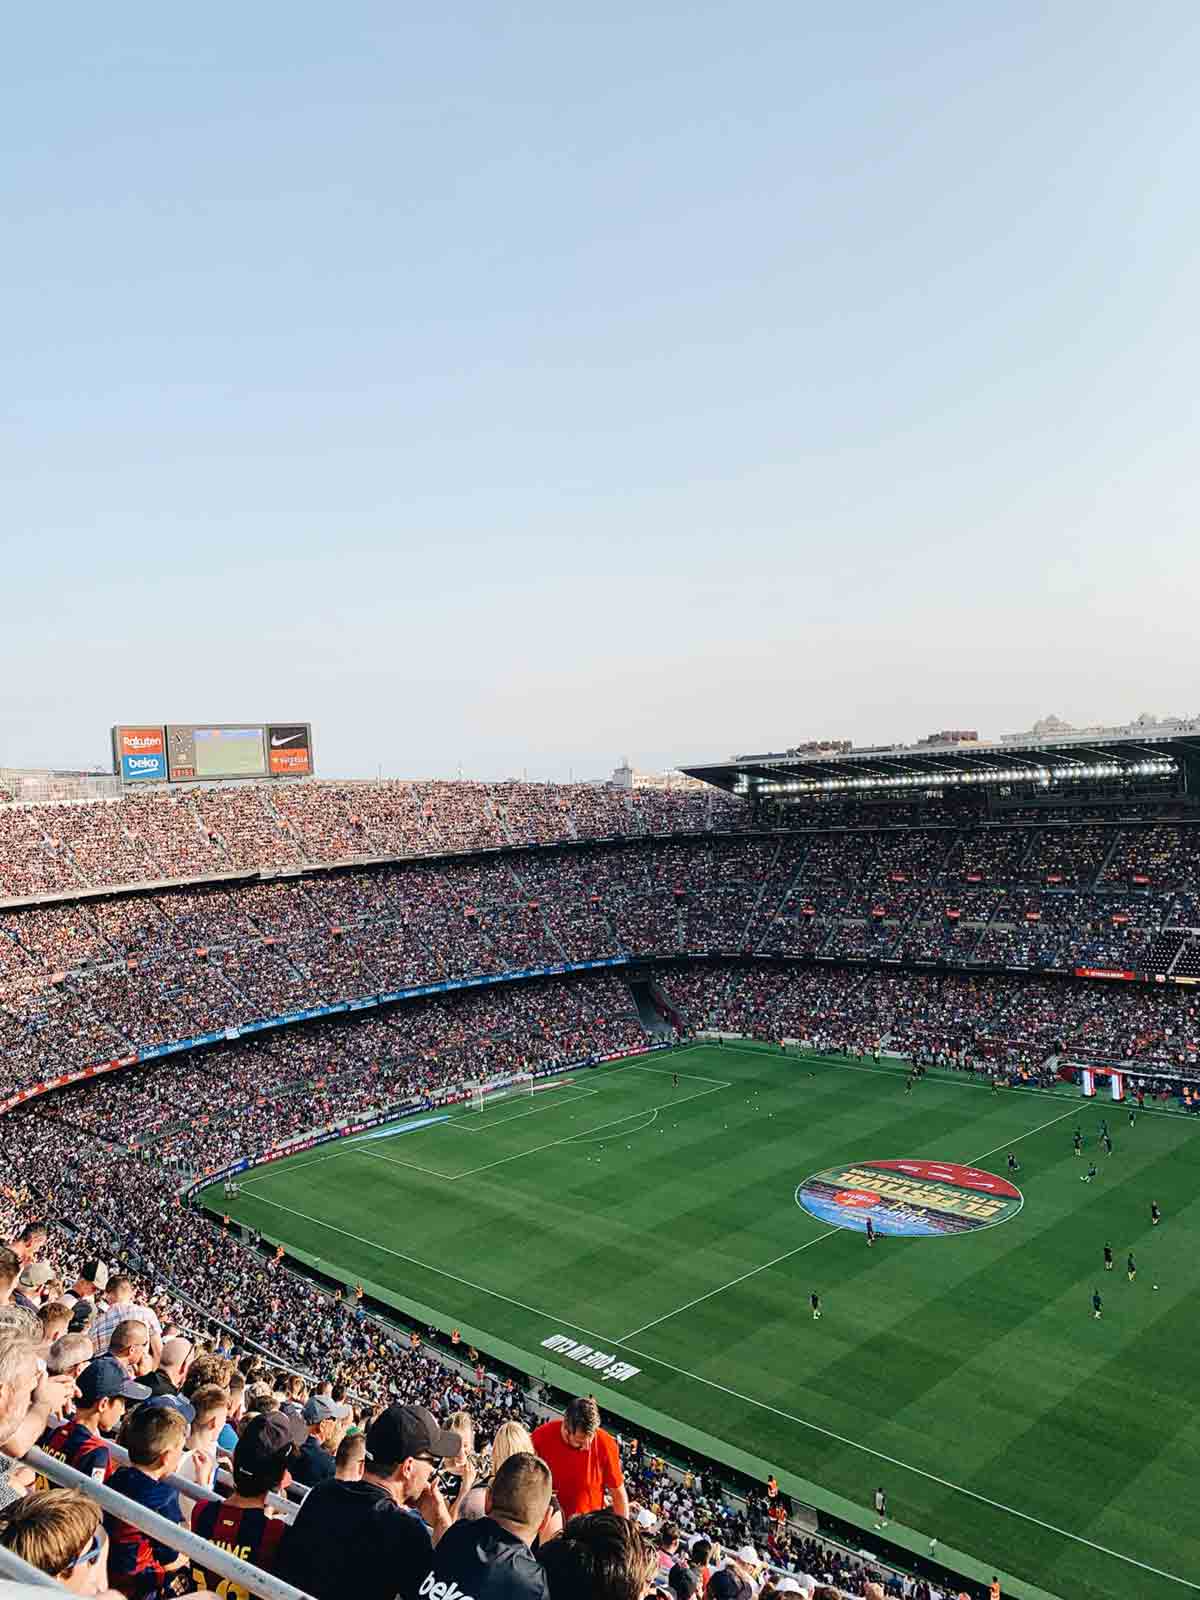 A full house game in Camp Nou as supporters rally for the home club FC Barcelona.